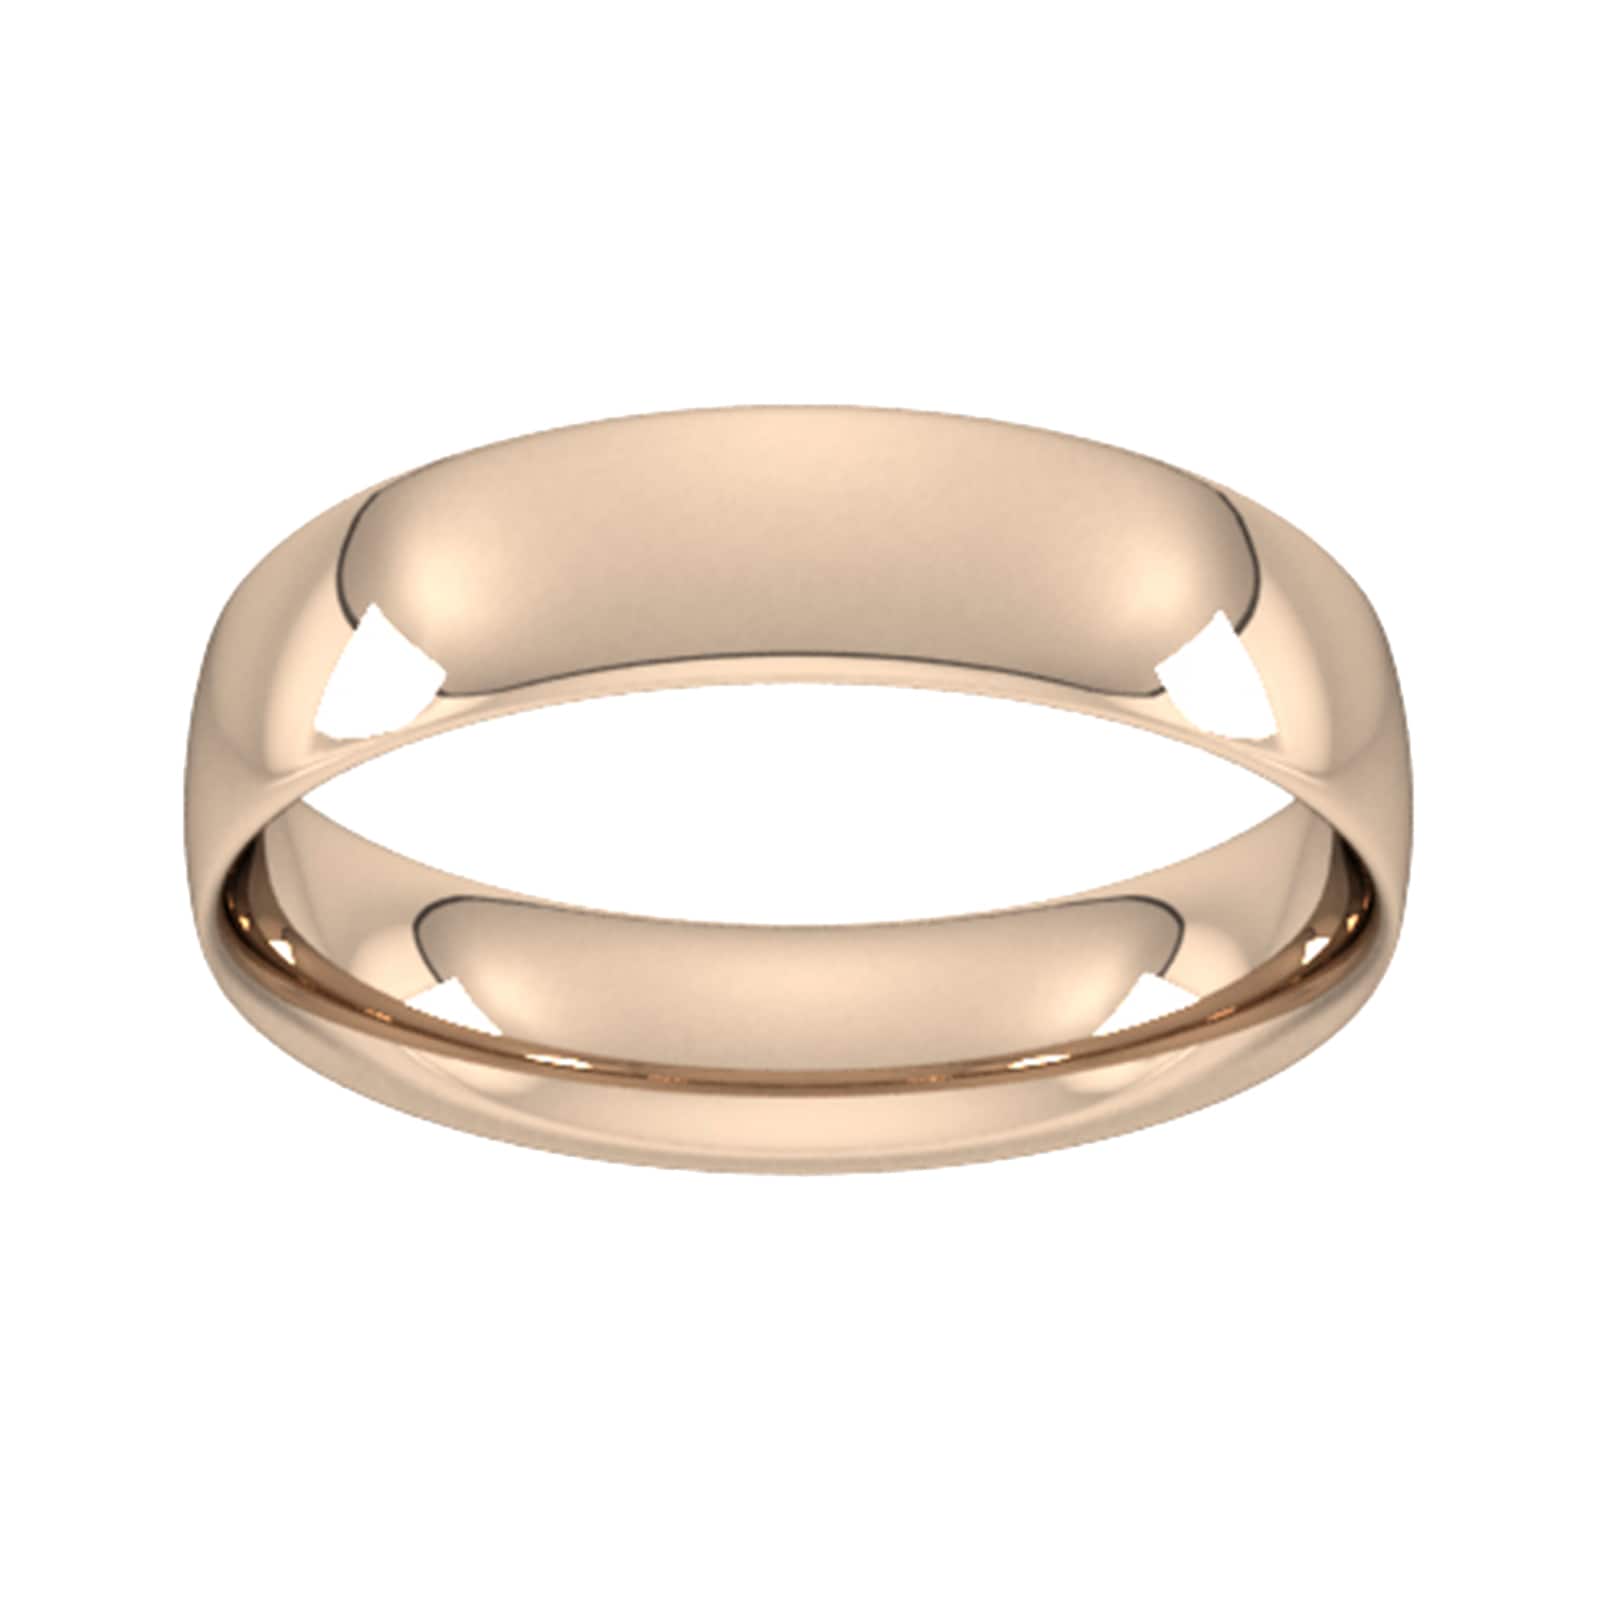 5mm Traditional Court Standard Wedding Ring In 9 Carat Rose Gold - Ring Size S